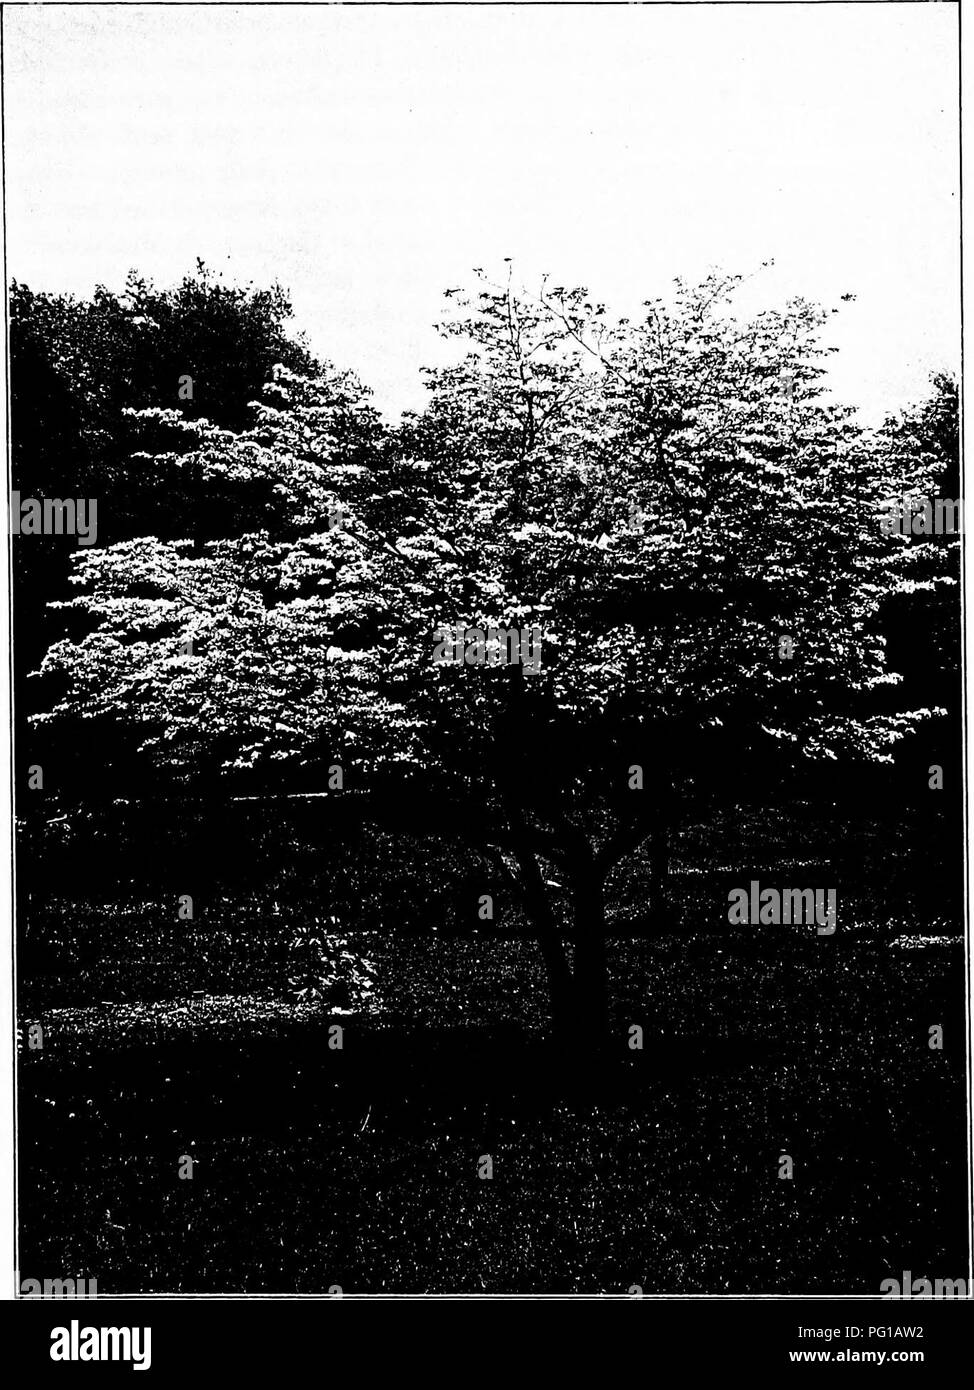 . North American trees : being descriptions and illustrations of the trees growing independently of cultivation in North America, north of Mexico and the West Indies . Trees. Dogwood 745. Fig. -Dogwood, New York Botanical Garden. ing many leaf scars. The terminal winter buds are oblong, covered by two oppo- site scales; the flower buds are terminal, subglobose, covered by 4 scales, which enlarge and become white in spring, and form the involucre. The leaves are thick and firm, elliptic to ovate, 6 to 18 cm. long, rather sharply taper-pointed, narrowed or rounded at the base to the stout, groov Stock Photo